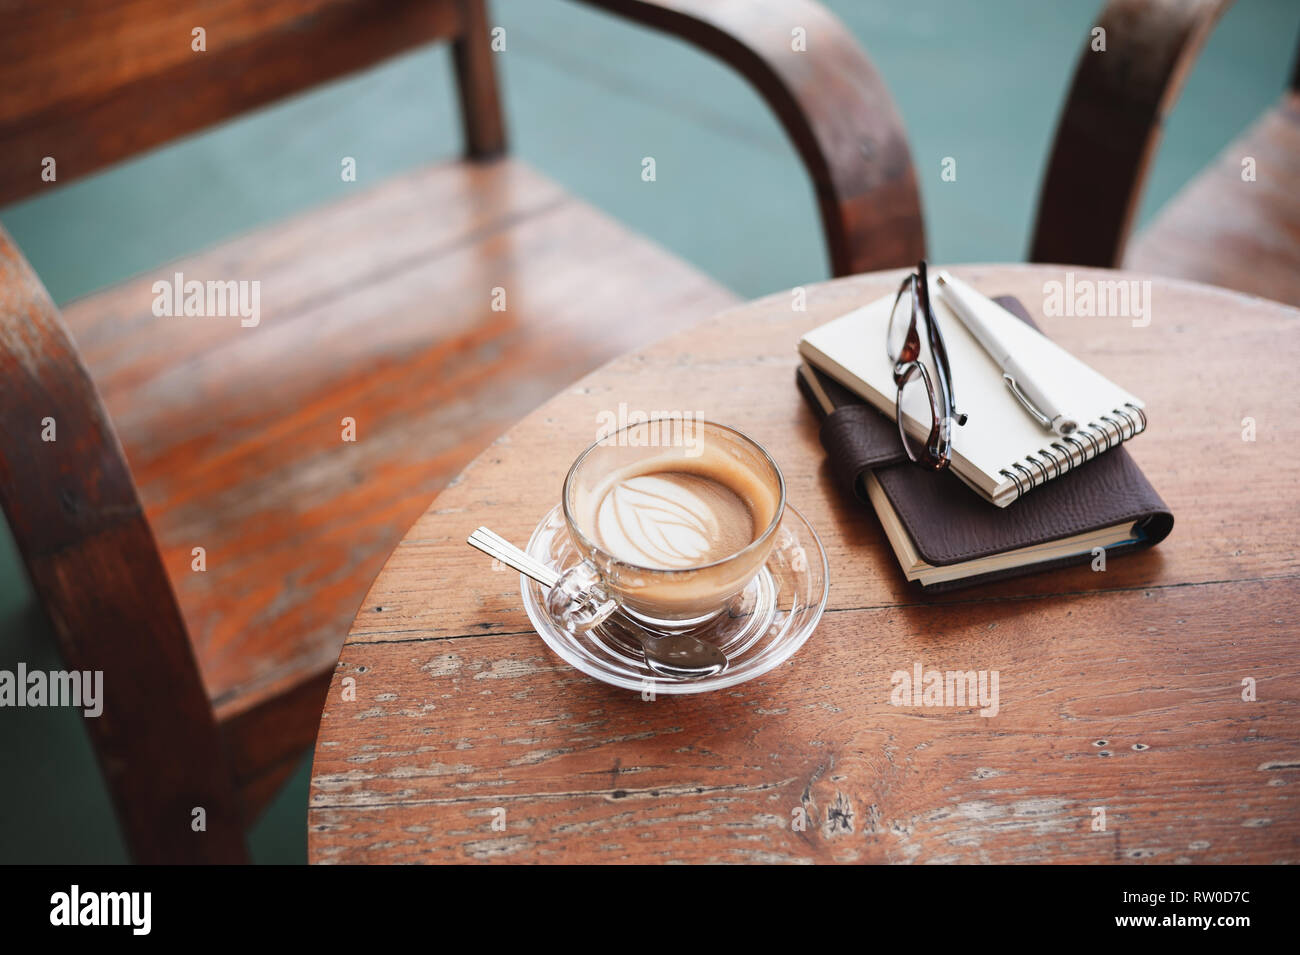 Abstract scene of coffee cup and notebooks on rustic wood table. Coffee break and relax time. Working from anywhere concept. Stock Photo